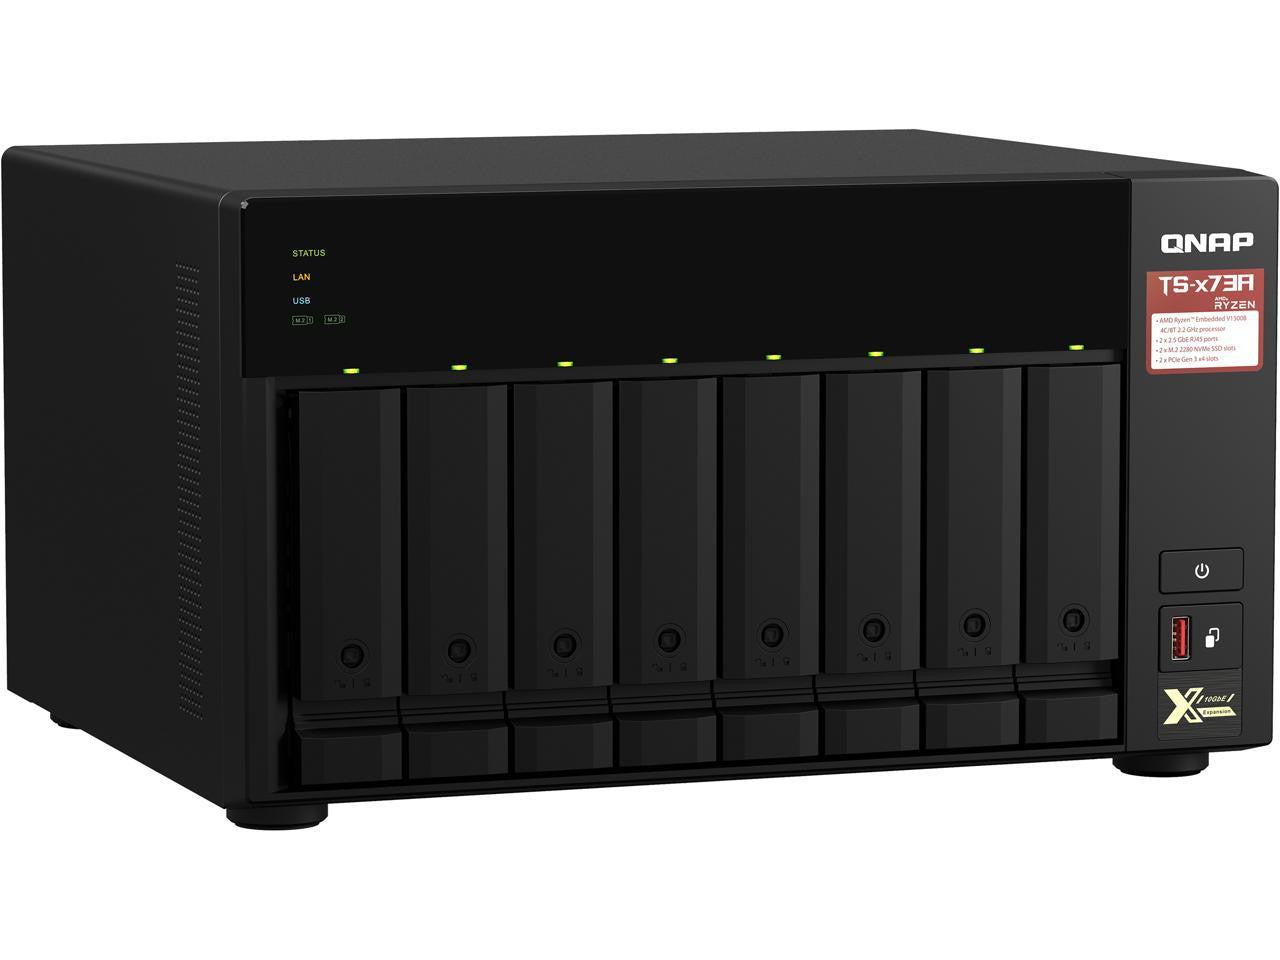 QNAP TS-873A 8-BAY NAS with 16GB DDR4 RAM and 64TB (8x8TB) Western Digital RED PLUS Drives Fully Assembled and Tested